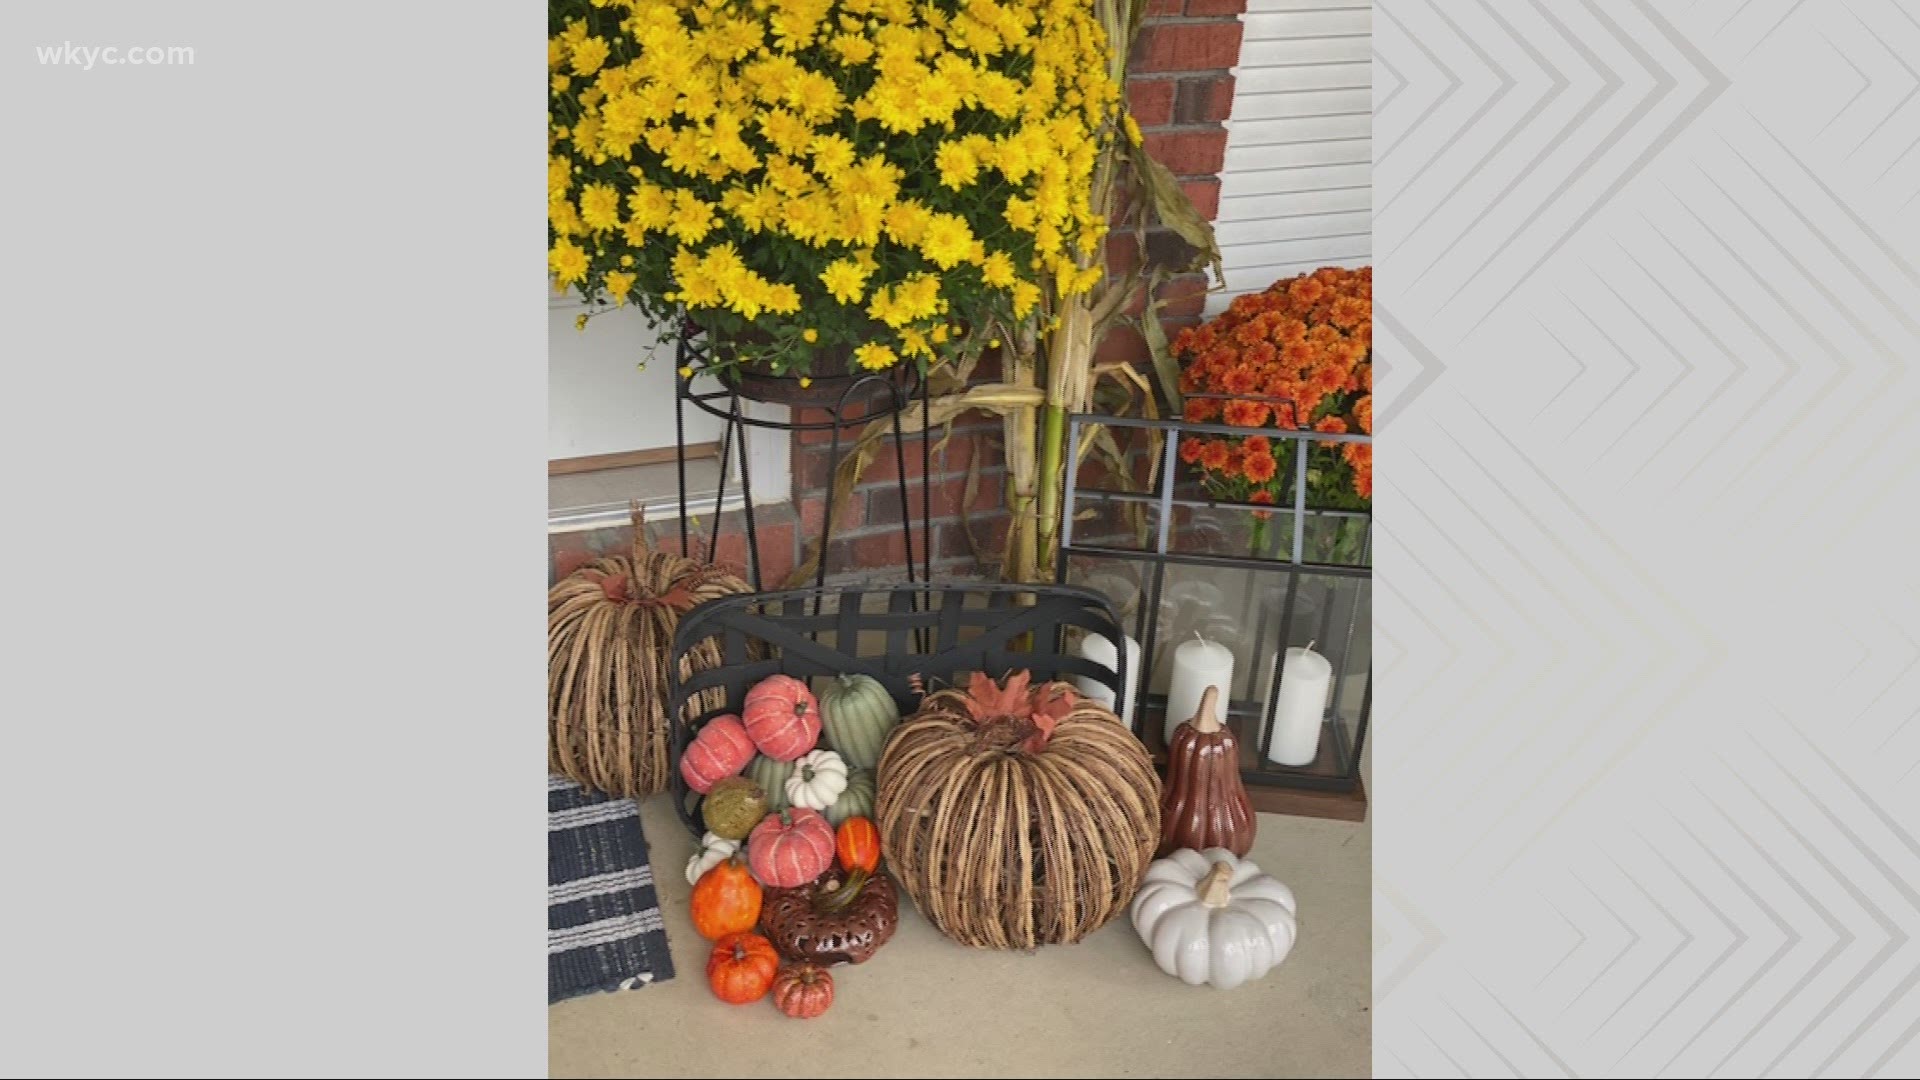 Fall is upon us! our friends over at Ashleigh Clark Interior Design show us how to make our porches festive and cozy this season.